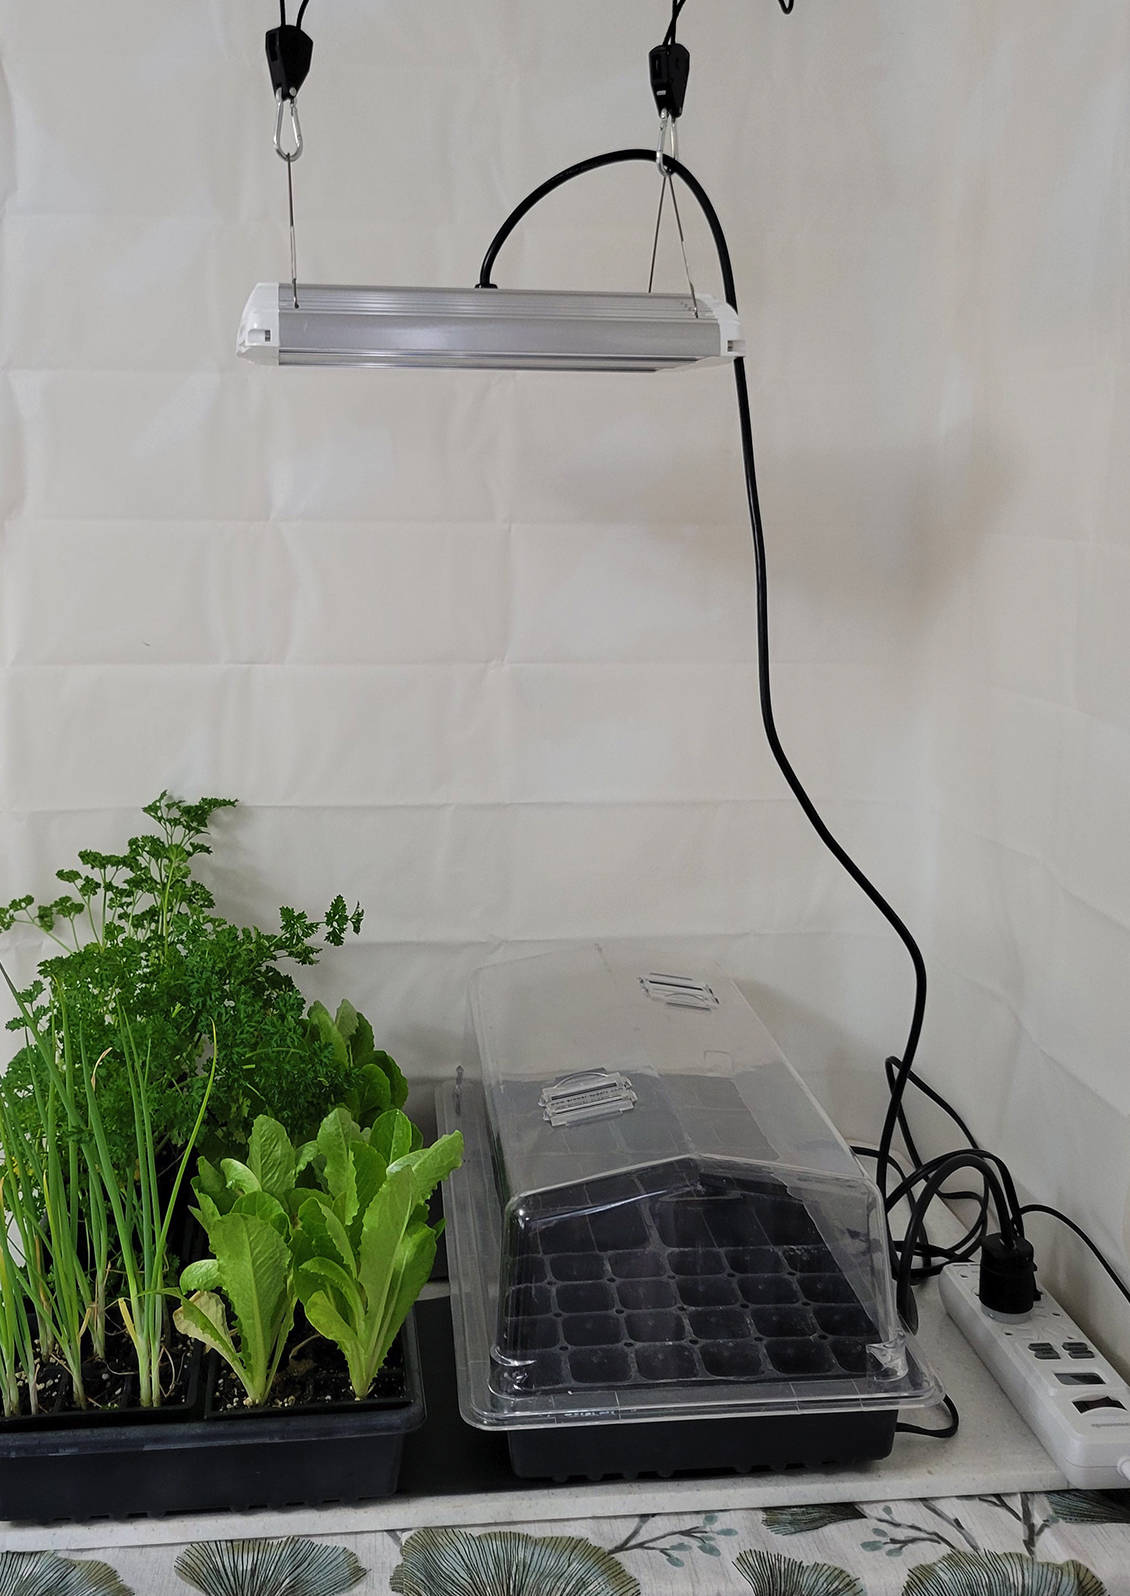 Tabletop grow stand with lights suspended from the ceiling. A shower curtain liner and vinyl tablecloth protect the surroundings from water and dirt. © Photo by Kay Torrance

